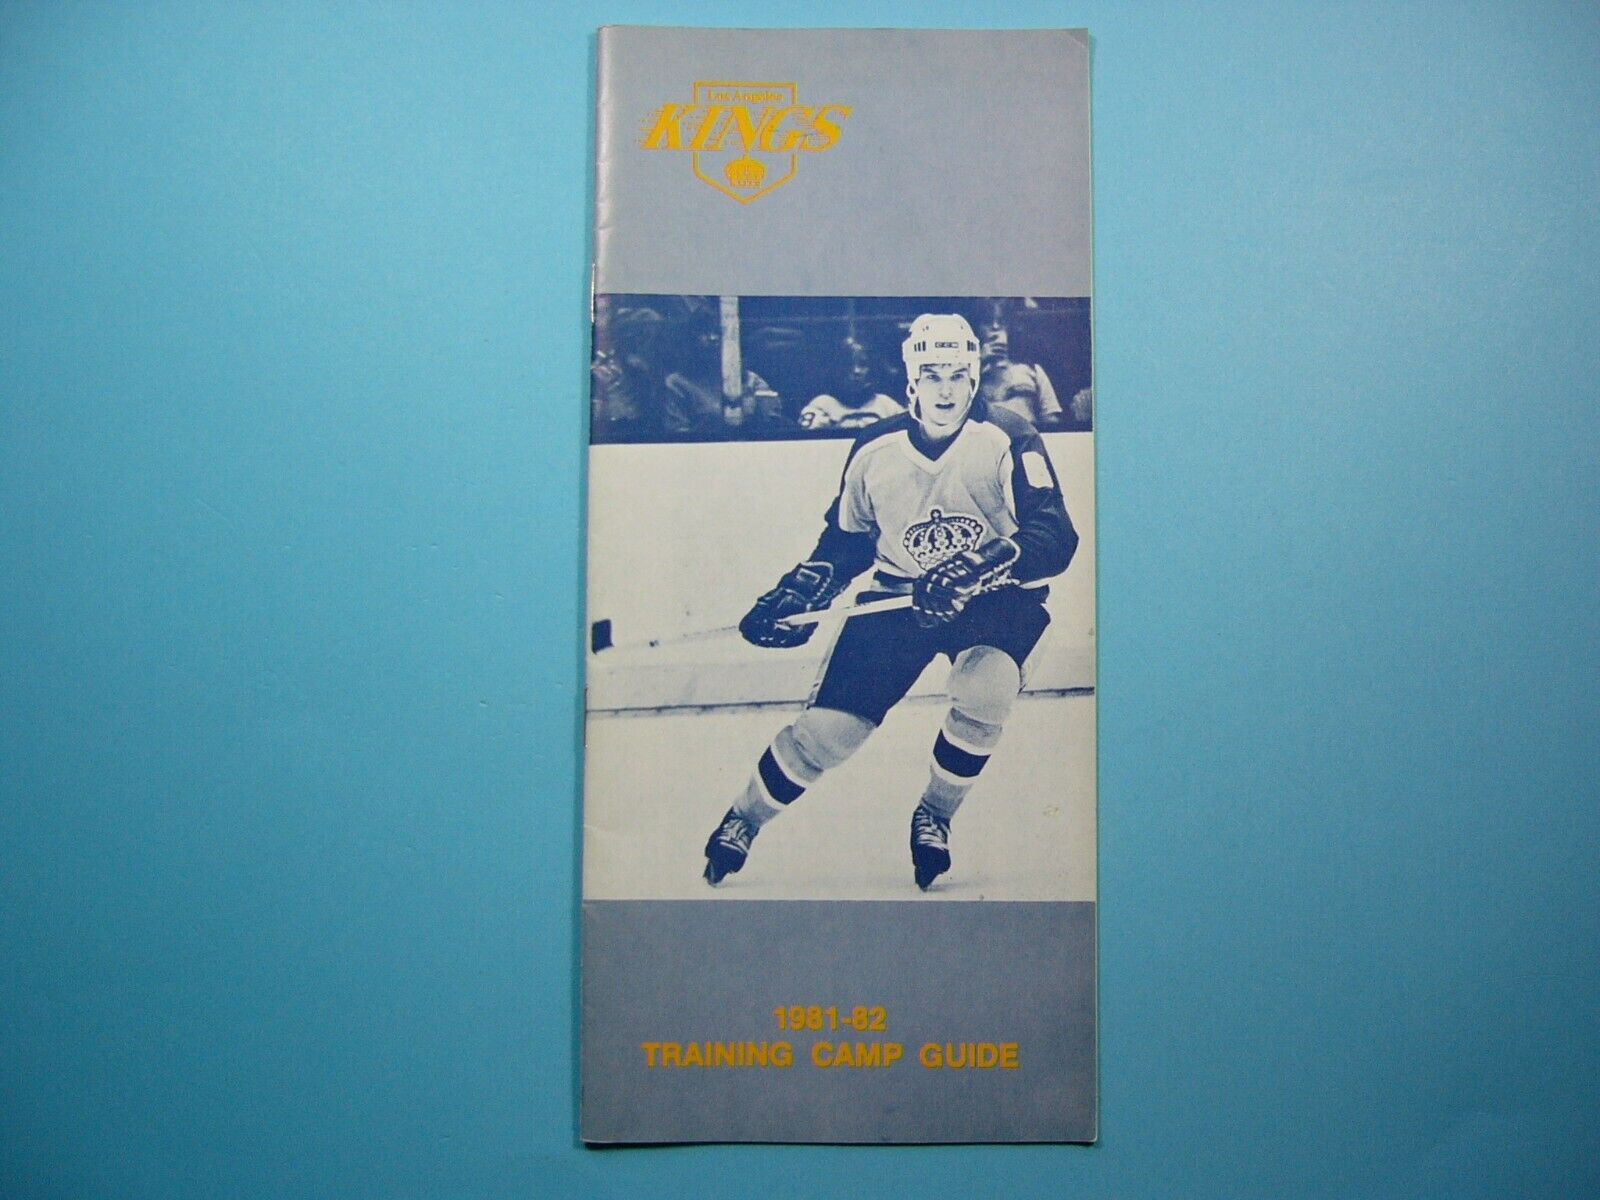 RARE 1981/82 LOS ANGELES KINGS HOCKEY TRAINING CAMP GUIDE YEARBOOK LARRY MURPHY